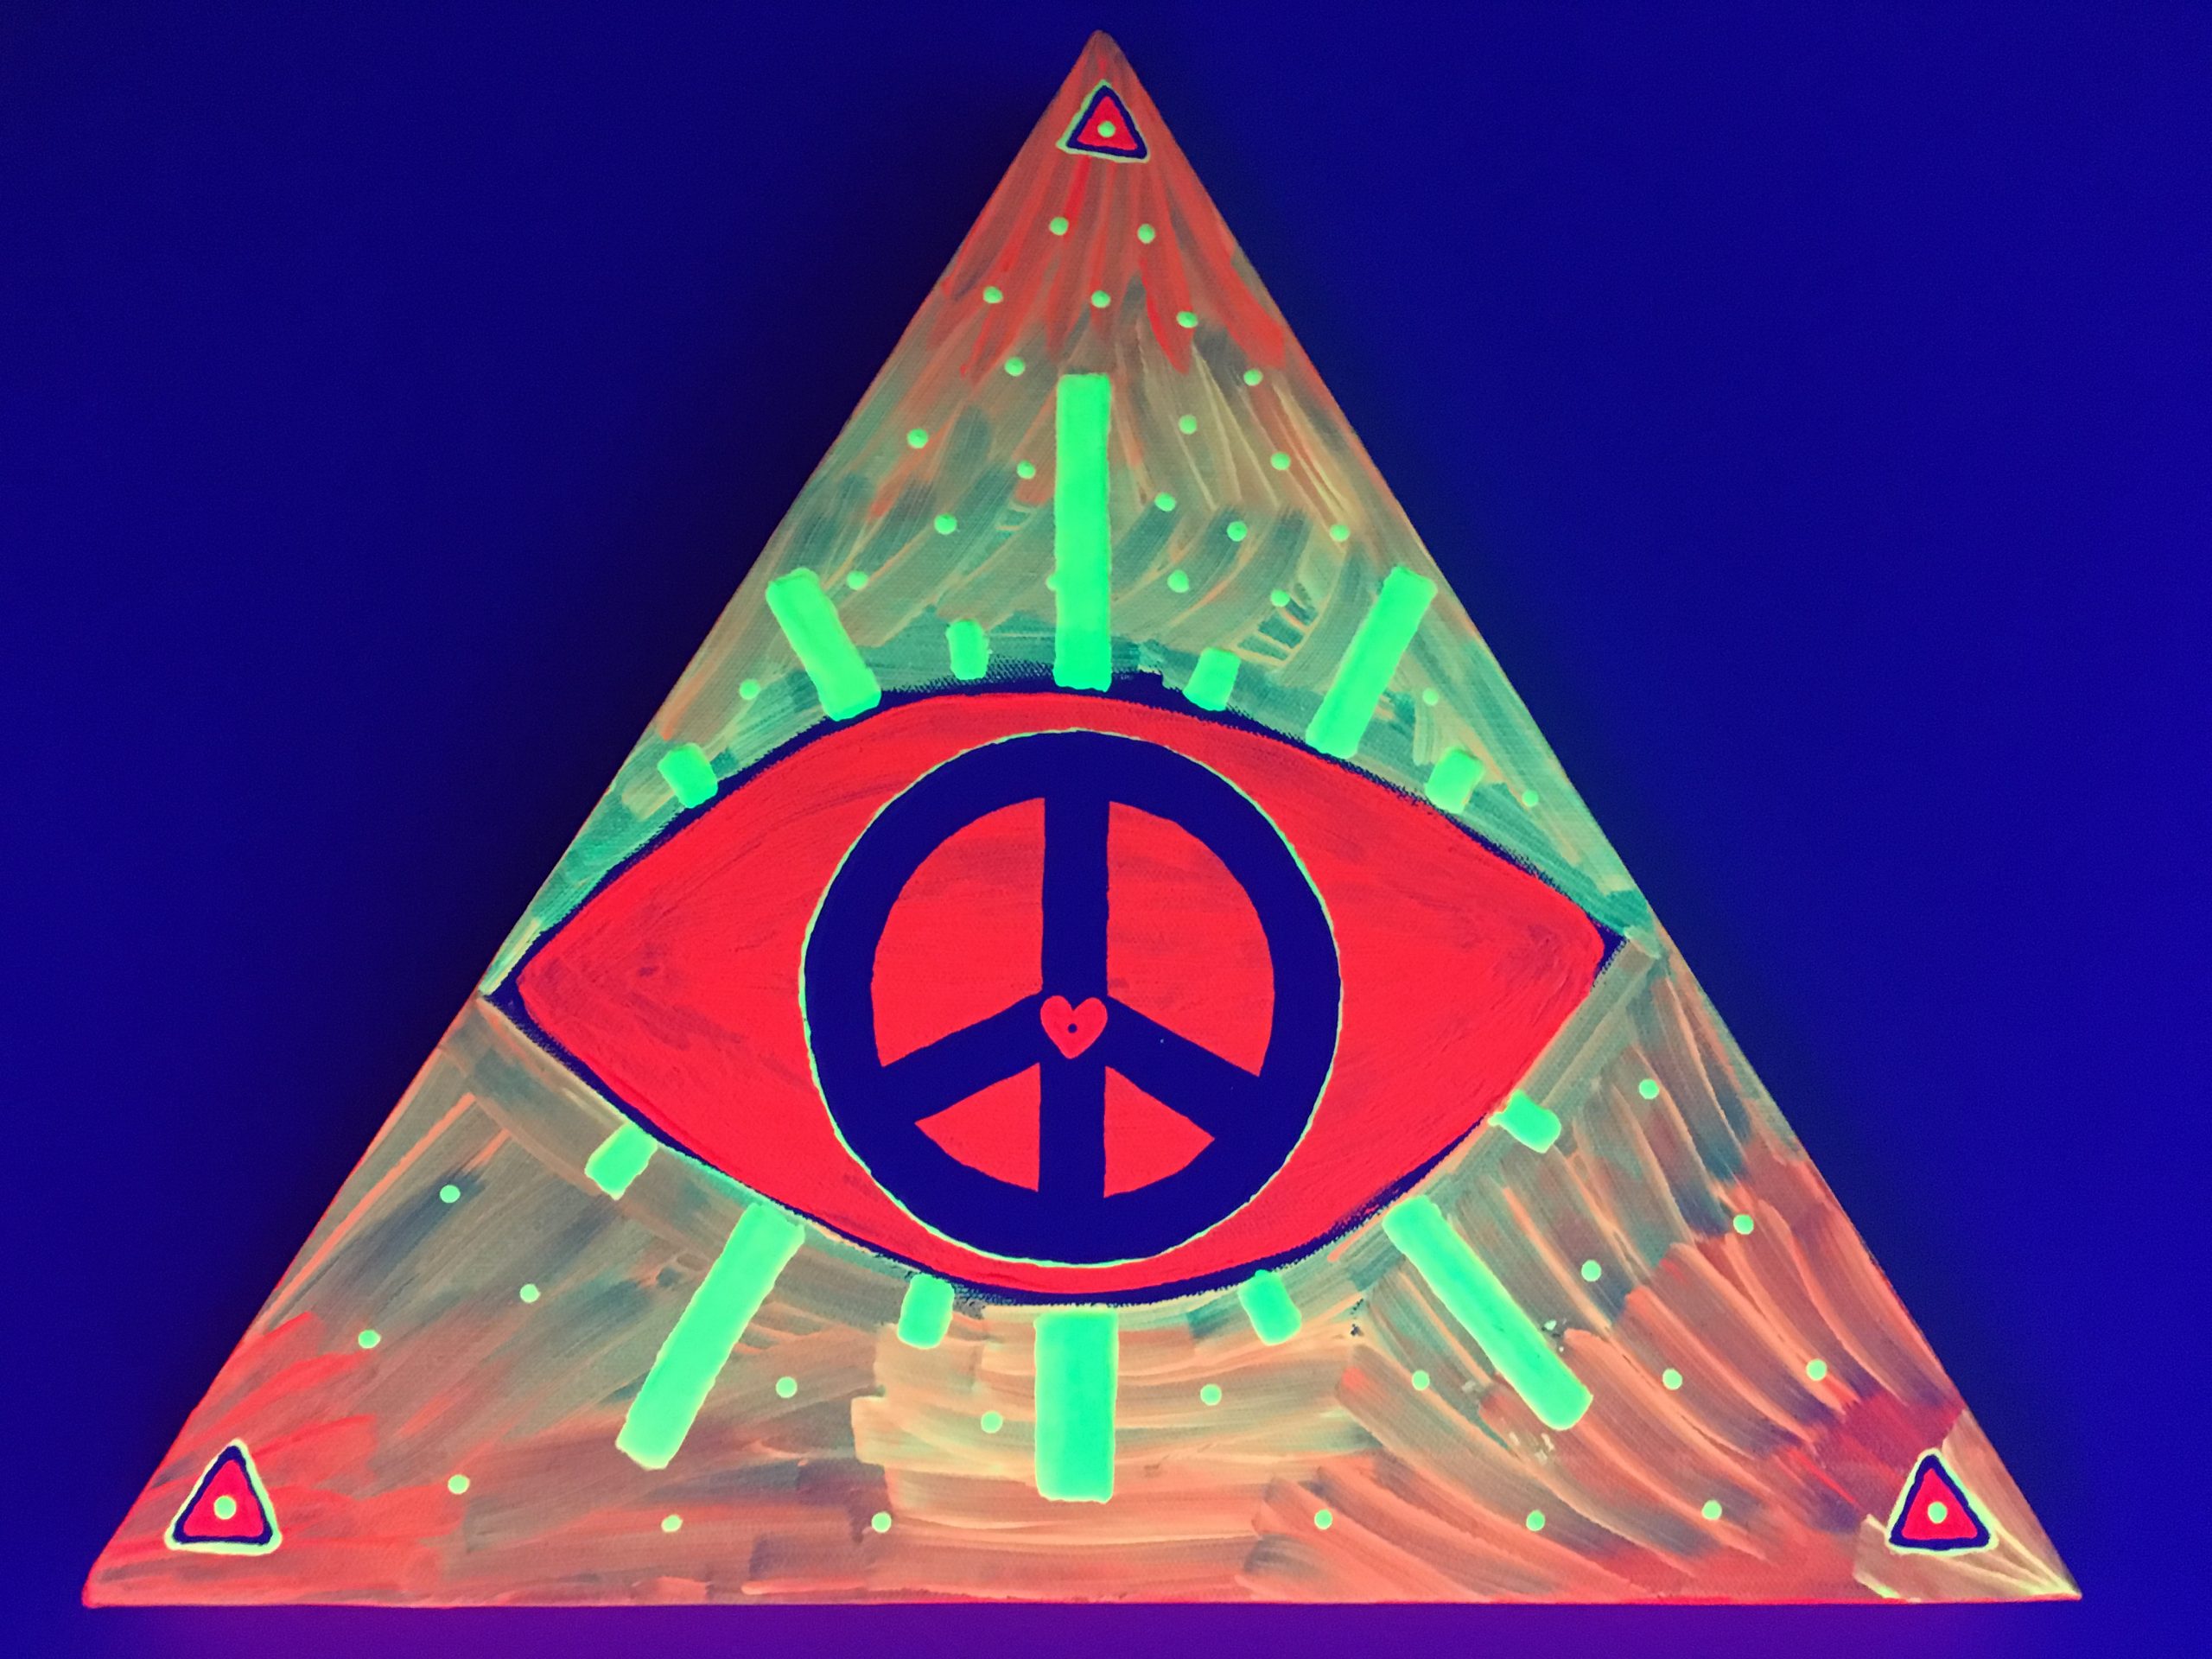 DIVINE VISION (with neon light)